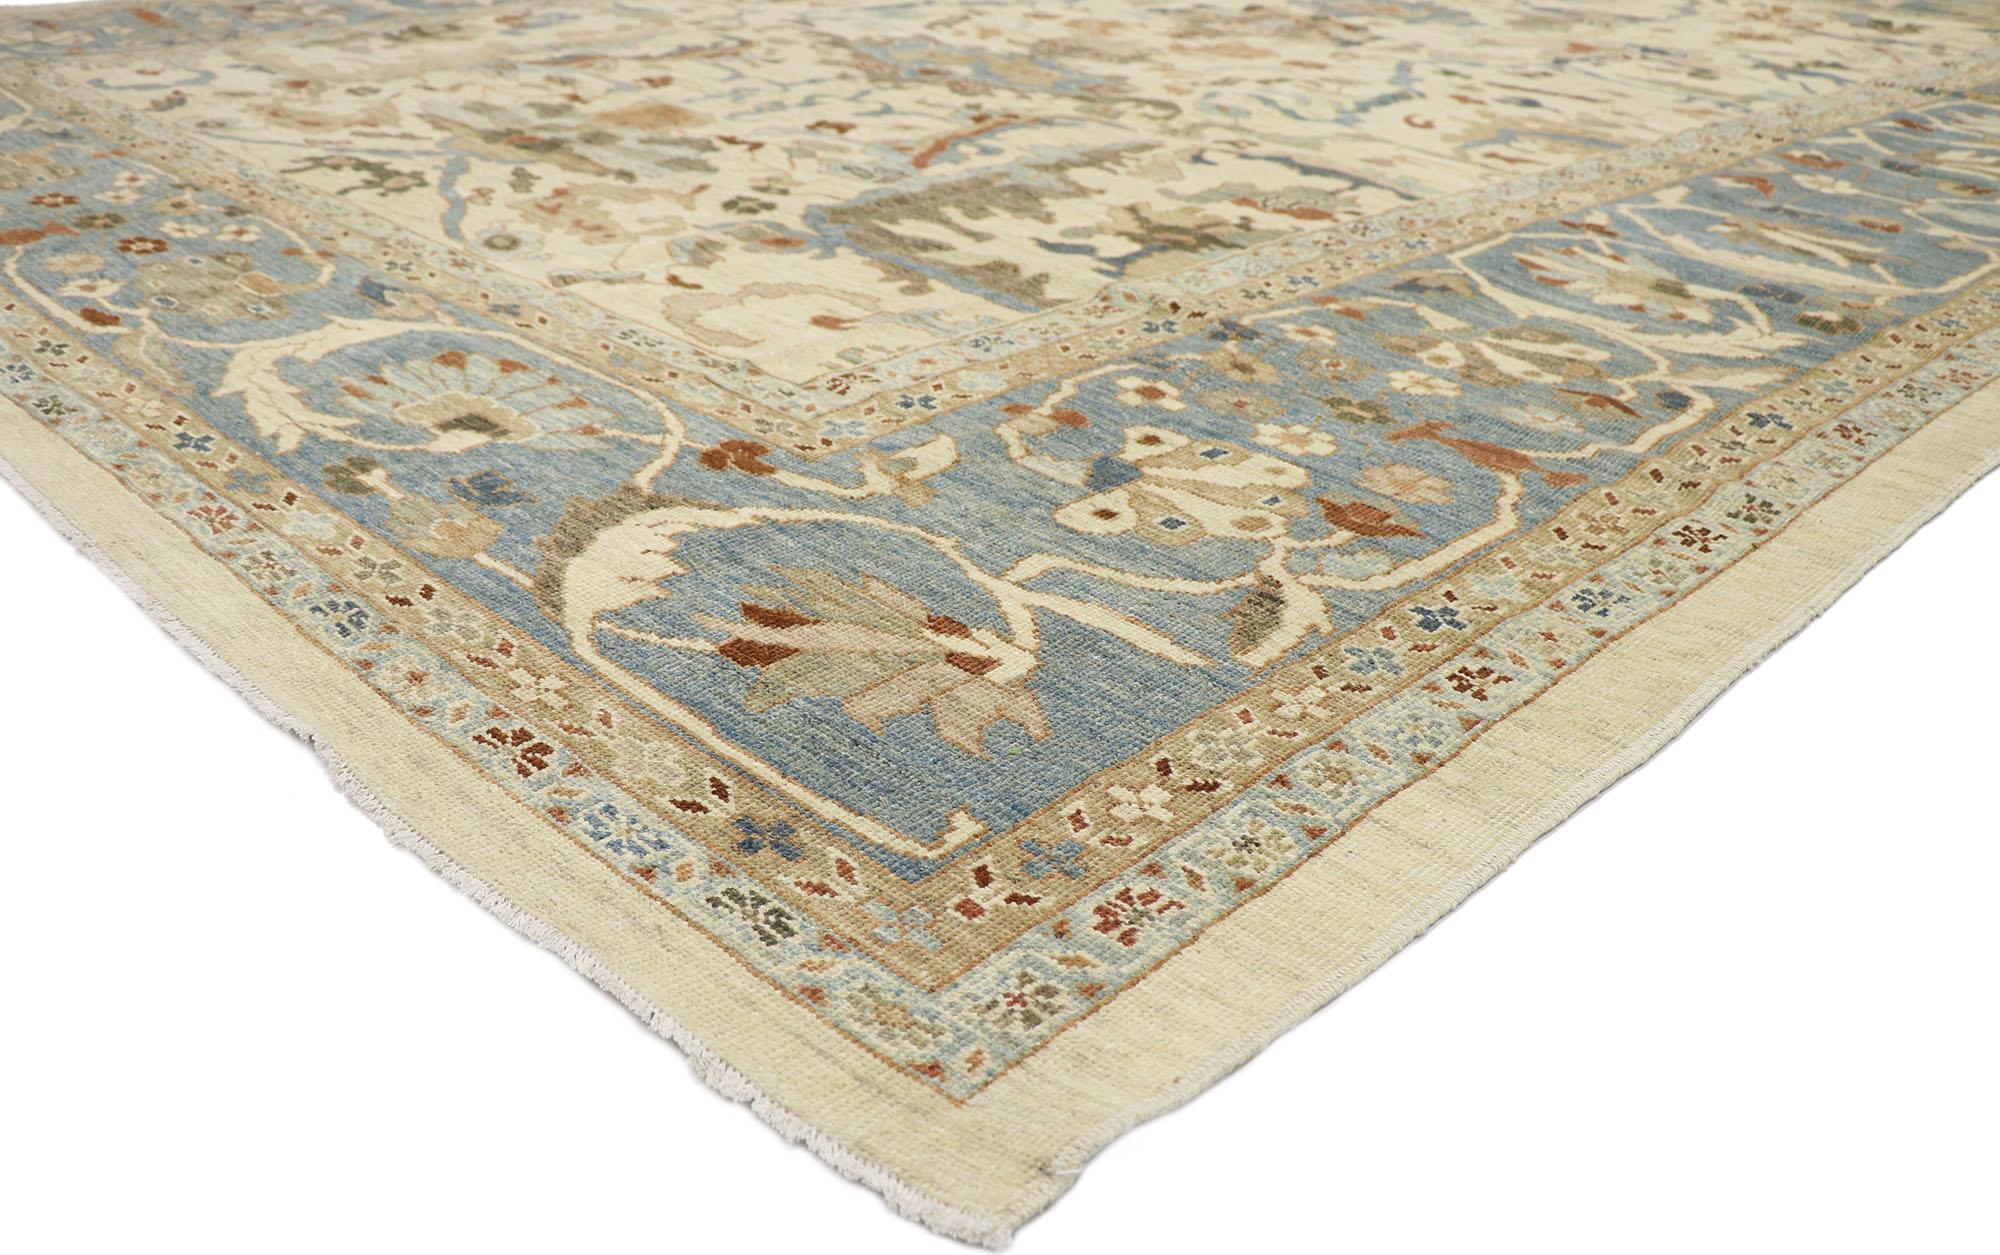 60910 new Contemporary Persian Sultanabad rug with Modern Transitional style 12'09 x 16'04. This hand-knotted wool contemporary Persian Sultanabad rug features an all-over botanical lattice pattern spread across an abrashed sand-beige field. An